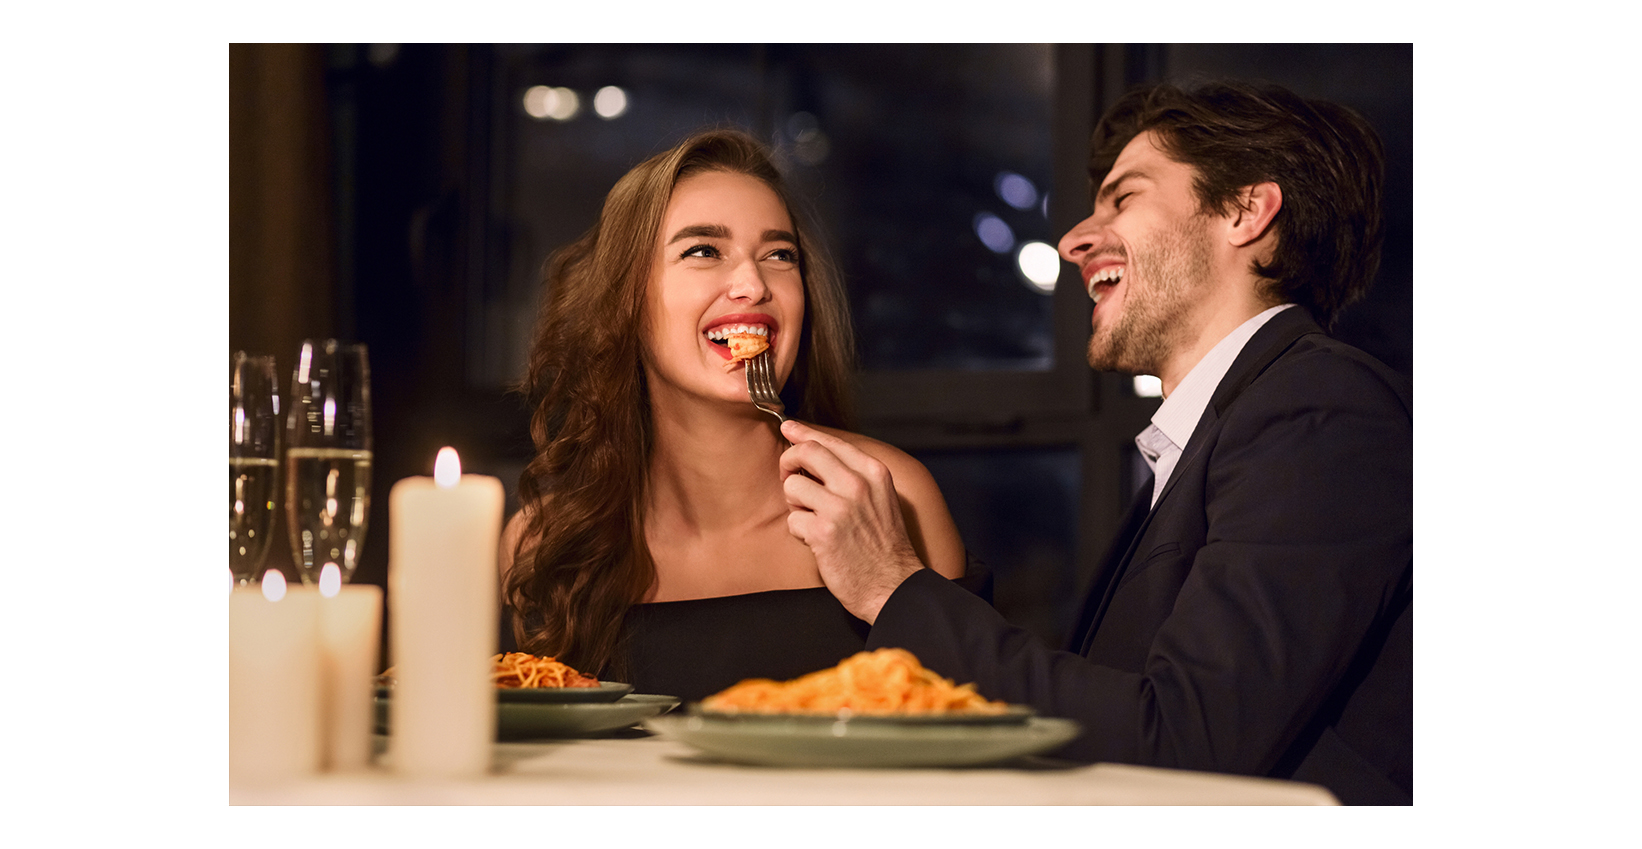 A couple eating food at a restaurant and laughing